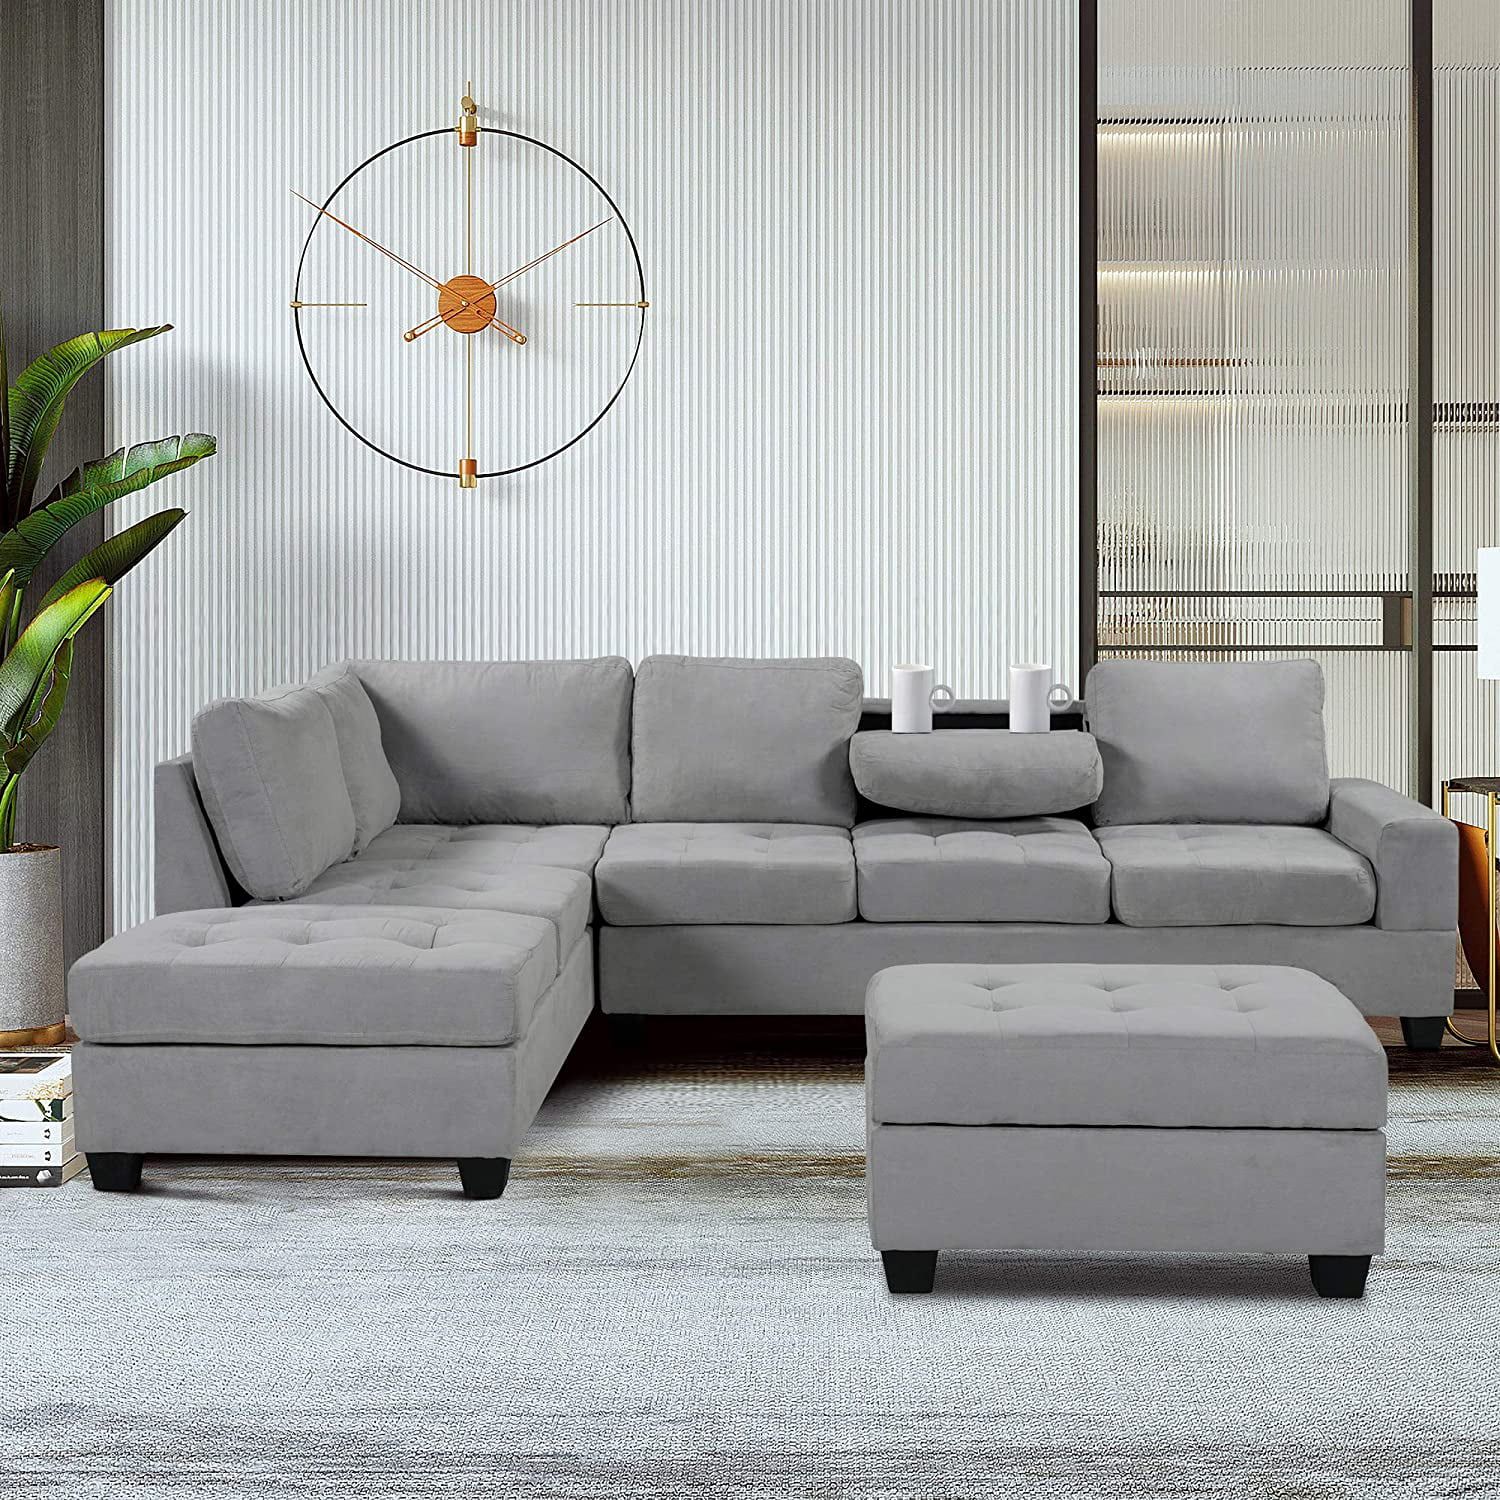 3 Piece Convertible Sectional Sofa L Shaped Couch With Reversible Throughout Sofas With Ottomans (View 16 of 20)